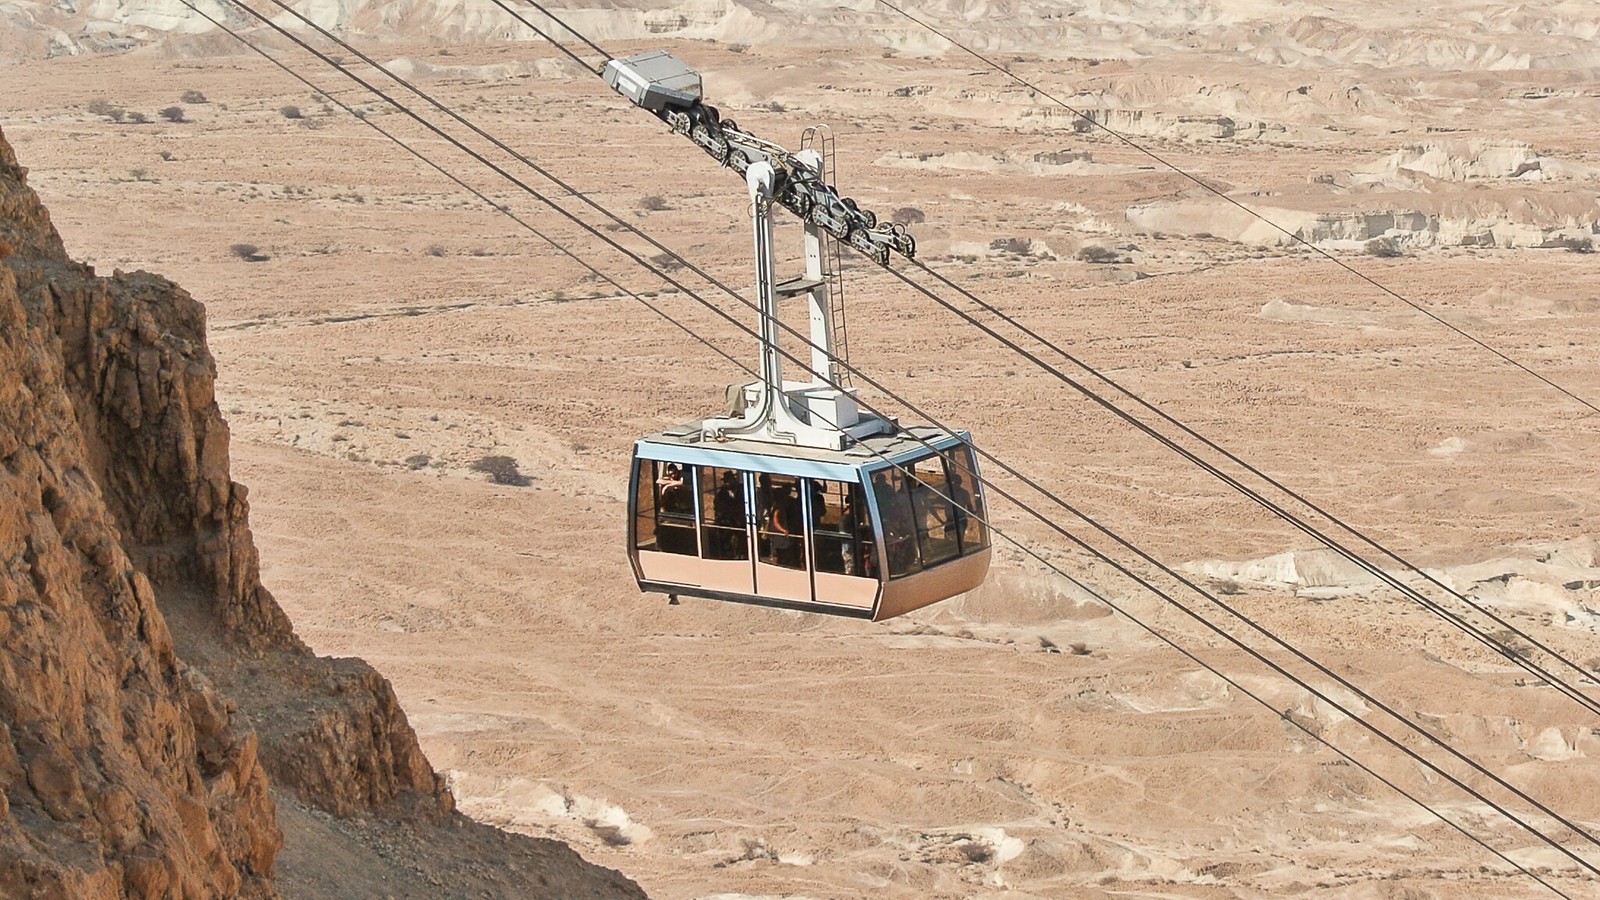 A picture of the Gondola